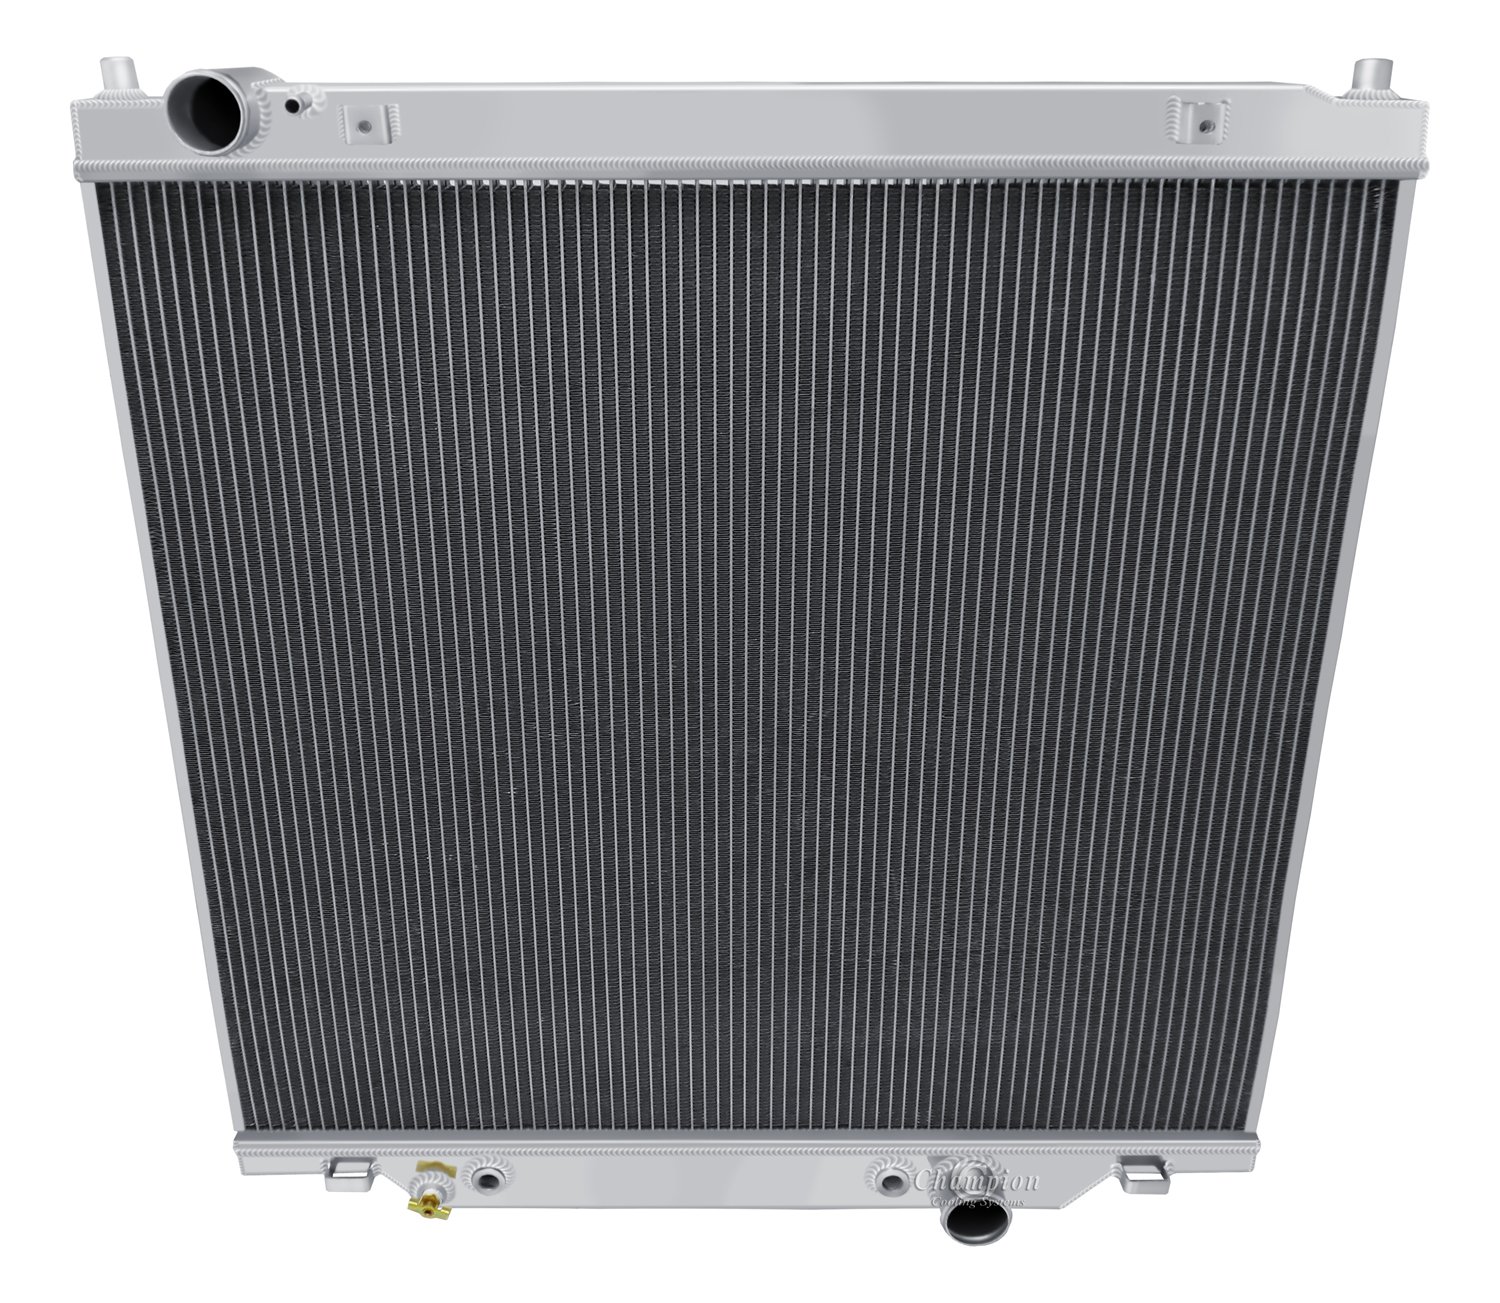 All-Aluminum Replacement Radiator for 2003-2005 Ford Truck/SUV 6.0L Diesel Engine